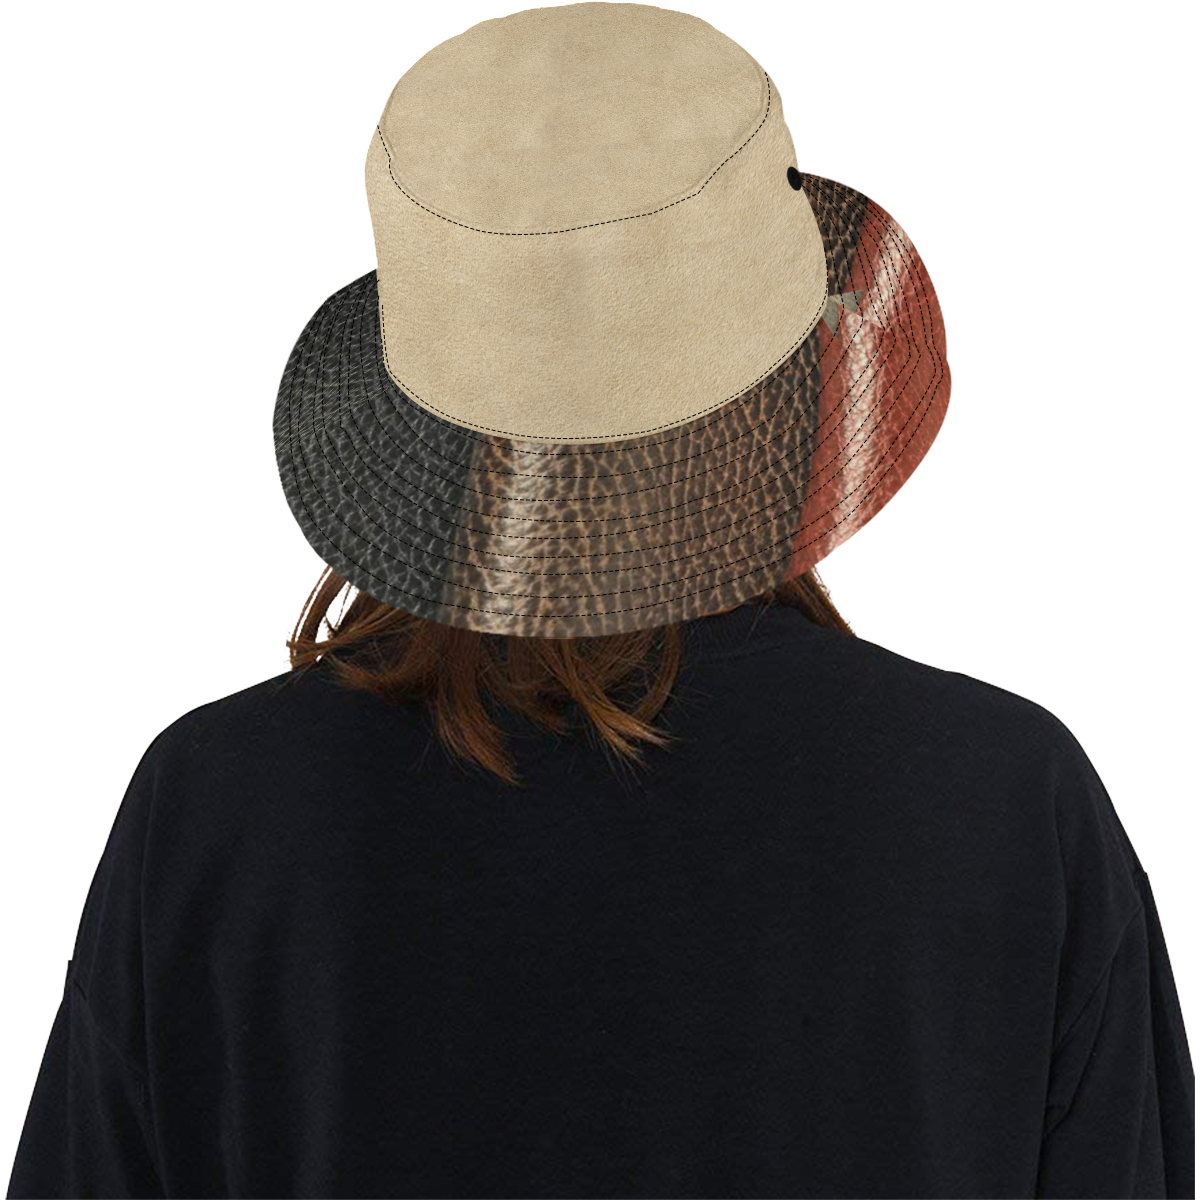 Leather & Suede flower hat All Over Print Bucket Hat